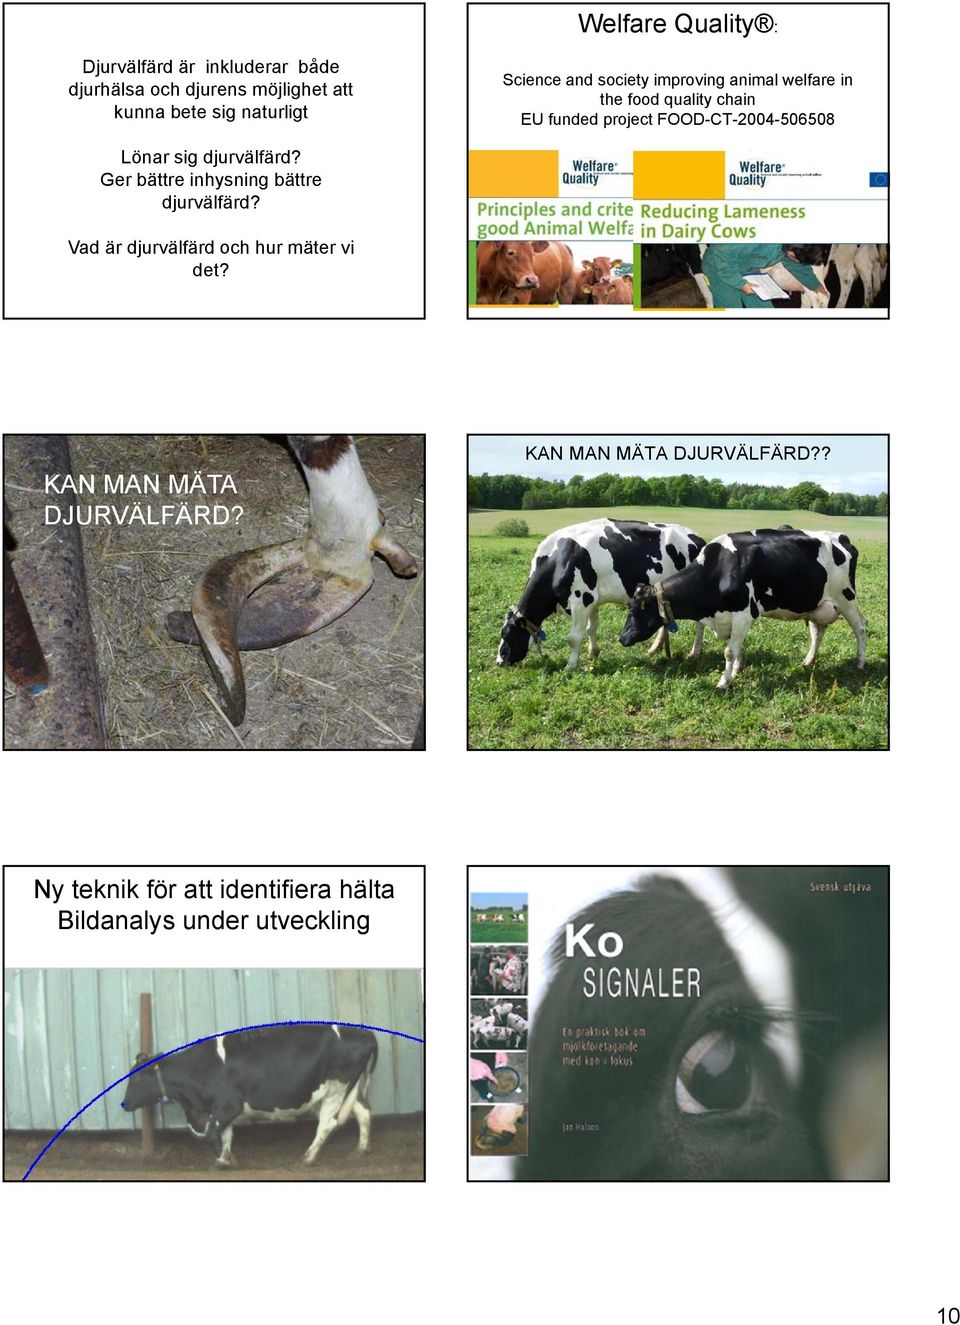 Science and society improving animal welfare in the food quality chain EU funded project FOOD-CT-2004-506508 Forskning för att utveckla